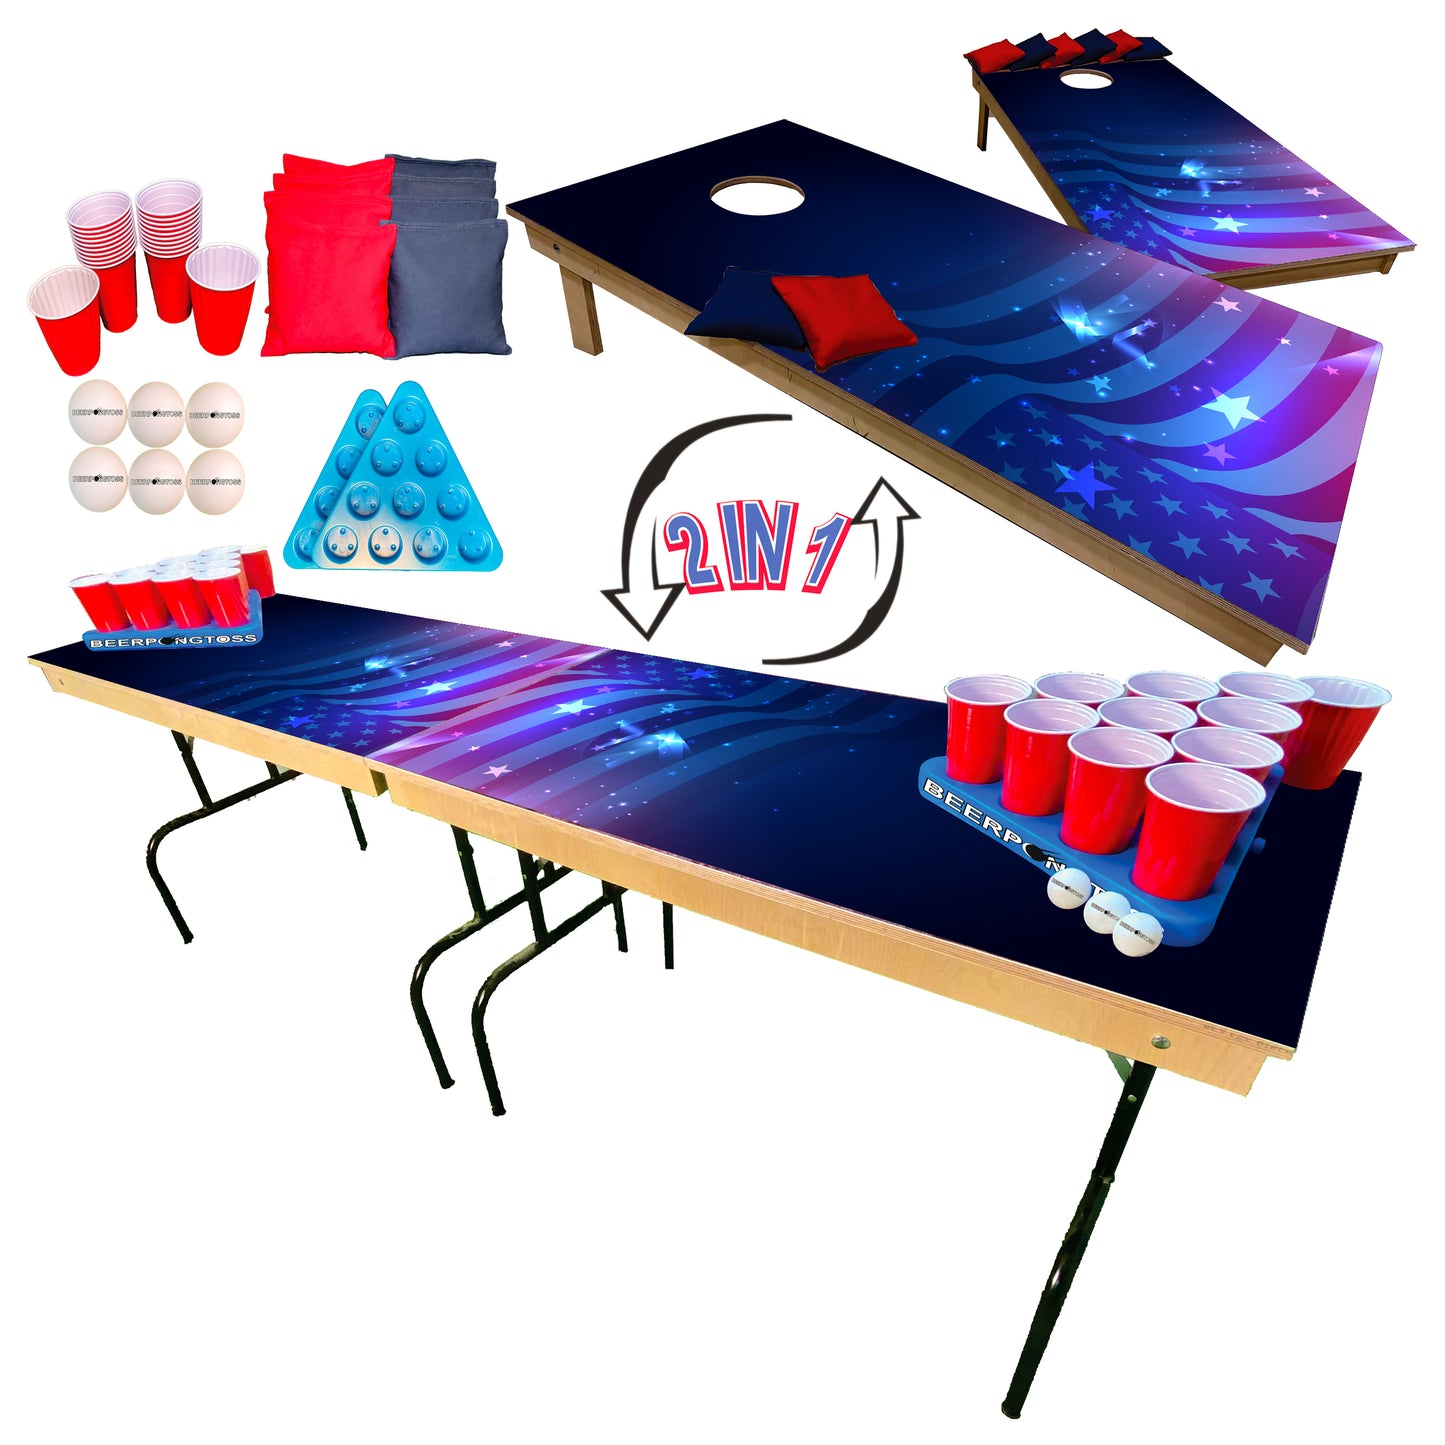 2-in-1 Cornhole & Pong Table - Glowing Flag